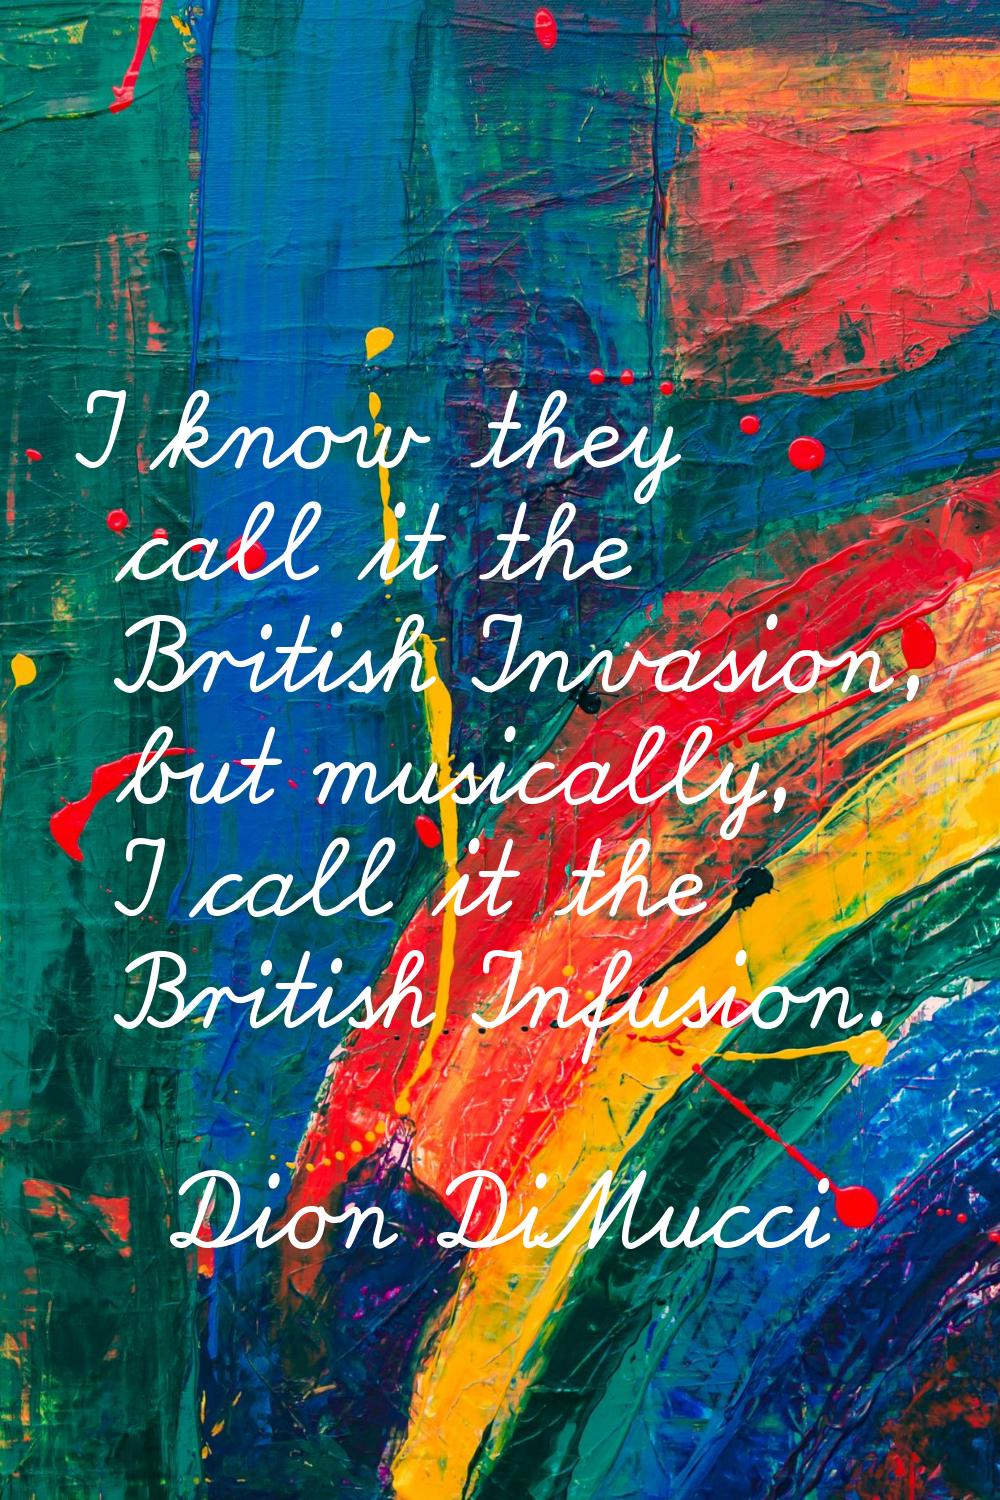 I know they call it the British Invasion, but musically, I call it the British Infusion.